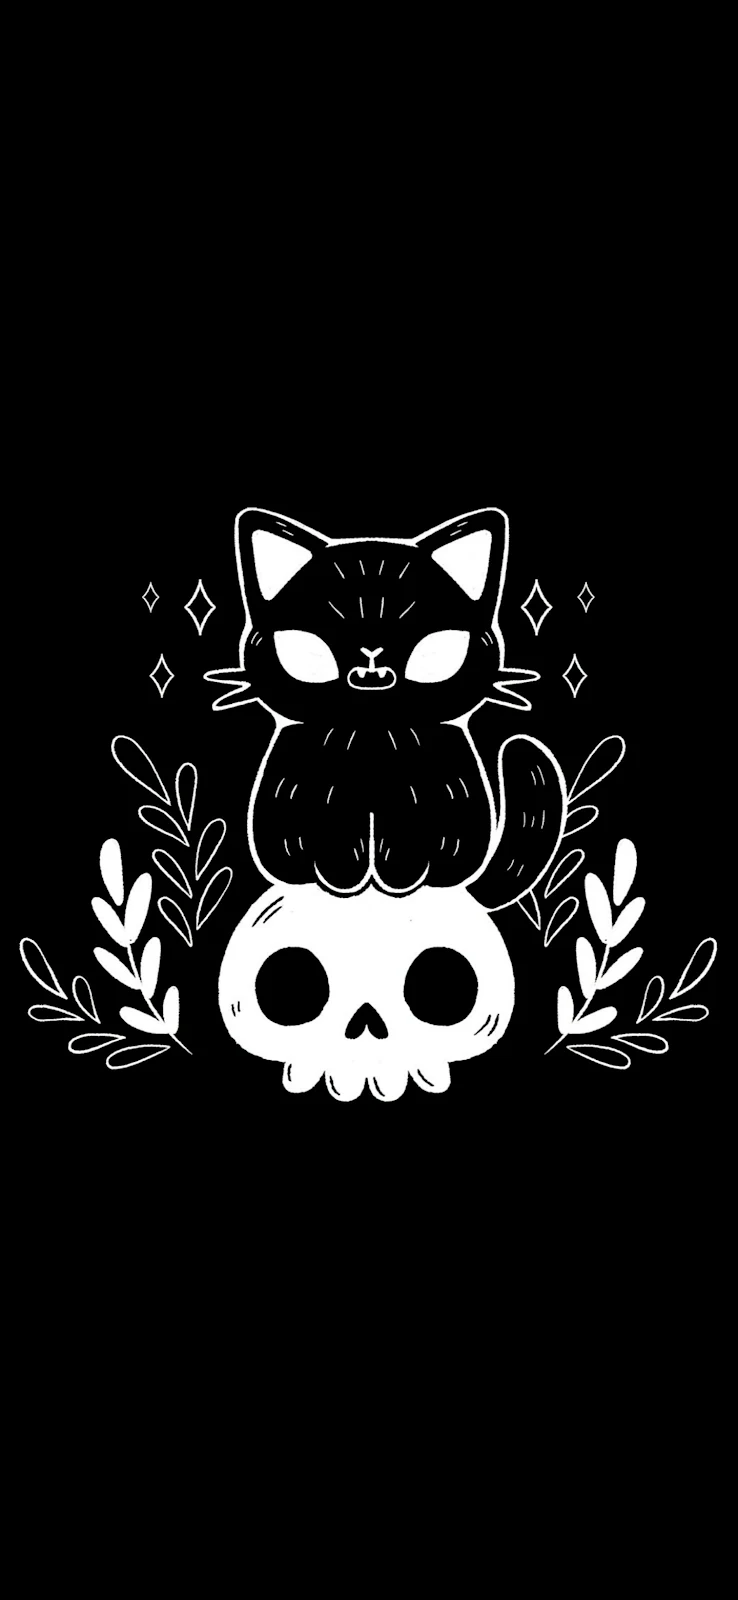 A Cool Black, Drawing, Art, Design, Cat 2K iPhone Wallpaper for Free Download in High Quality [1440x3120]